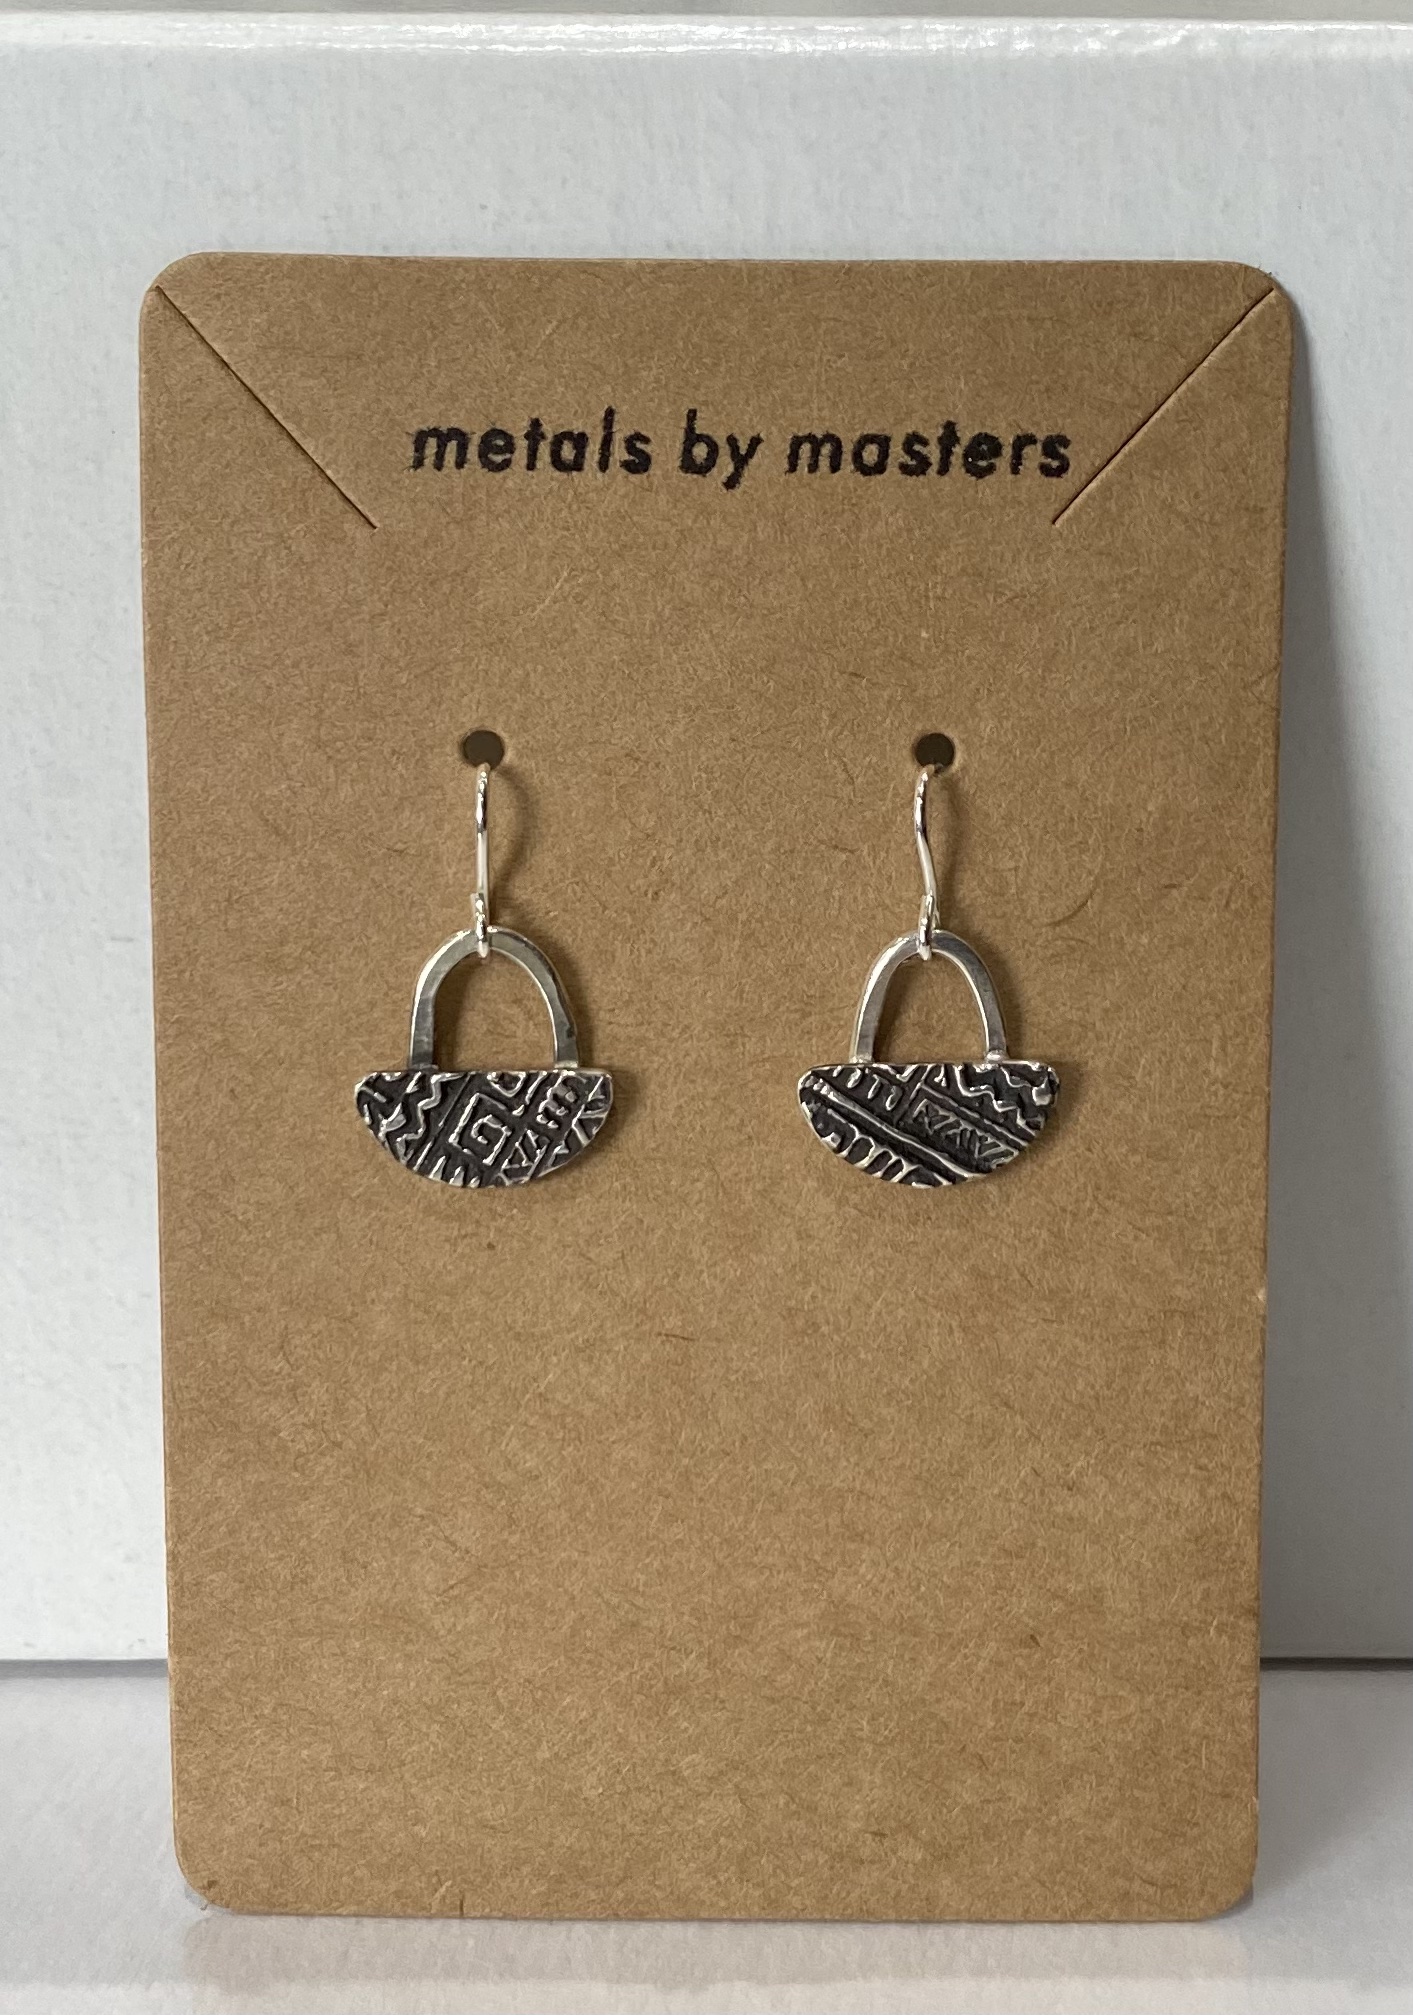 Half Round PMC Earrings EM142
Sterling Silver
$35.